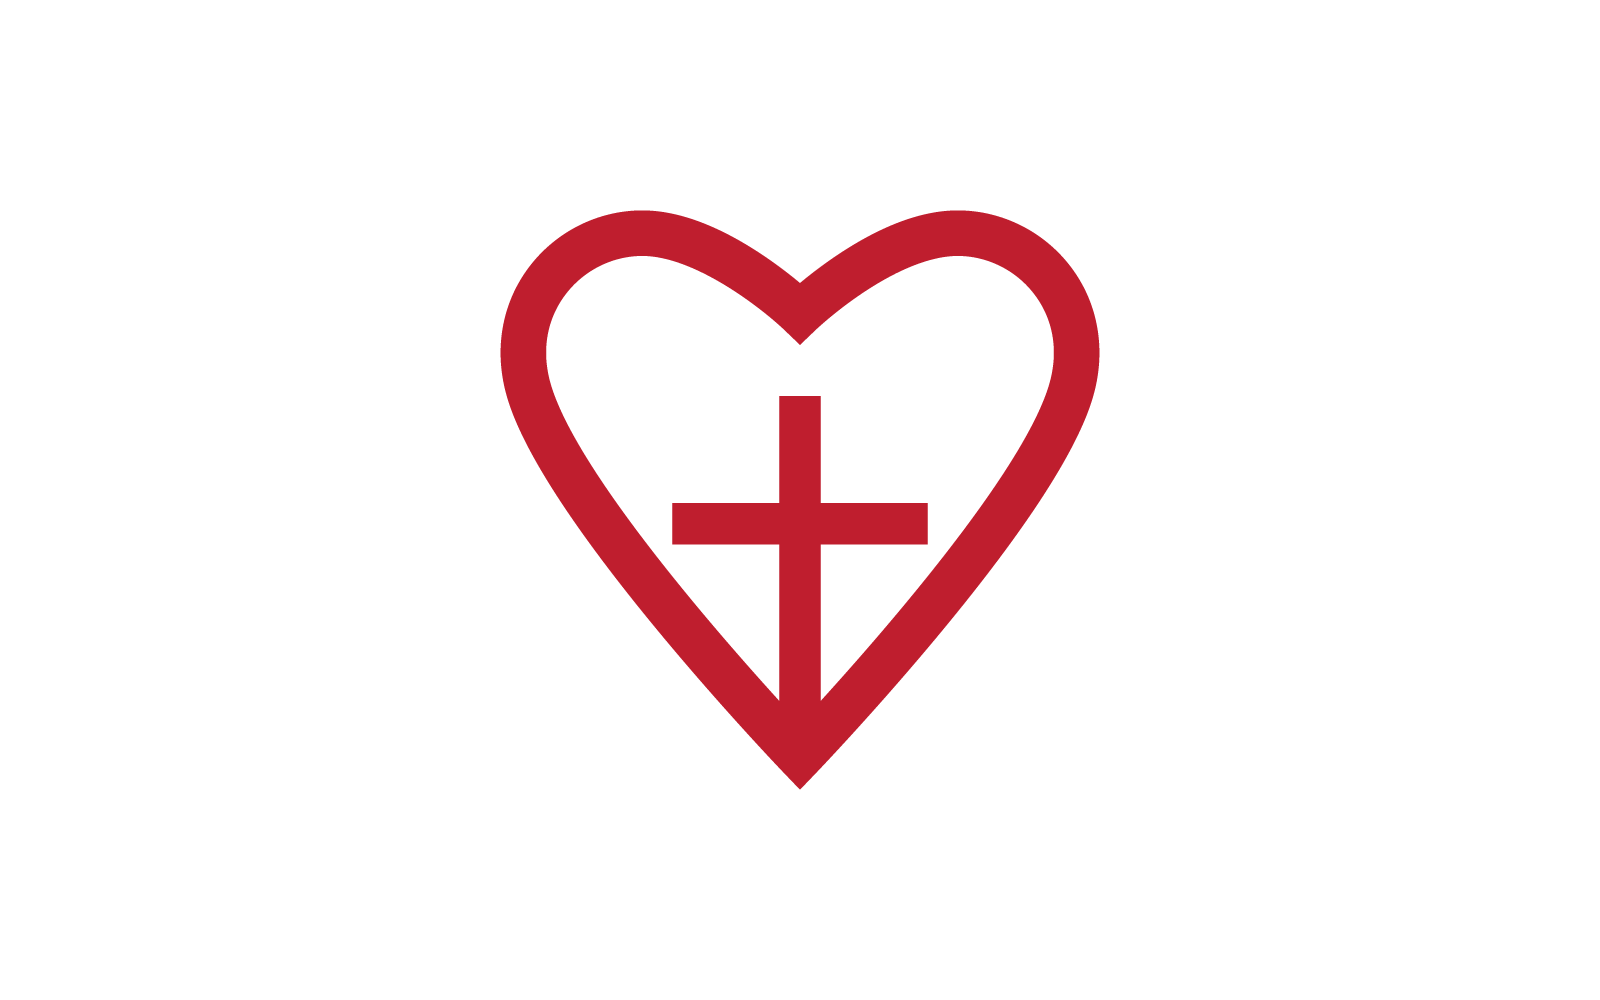 Cross and love logo vector illustration template